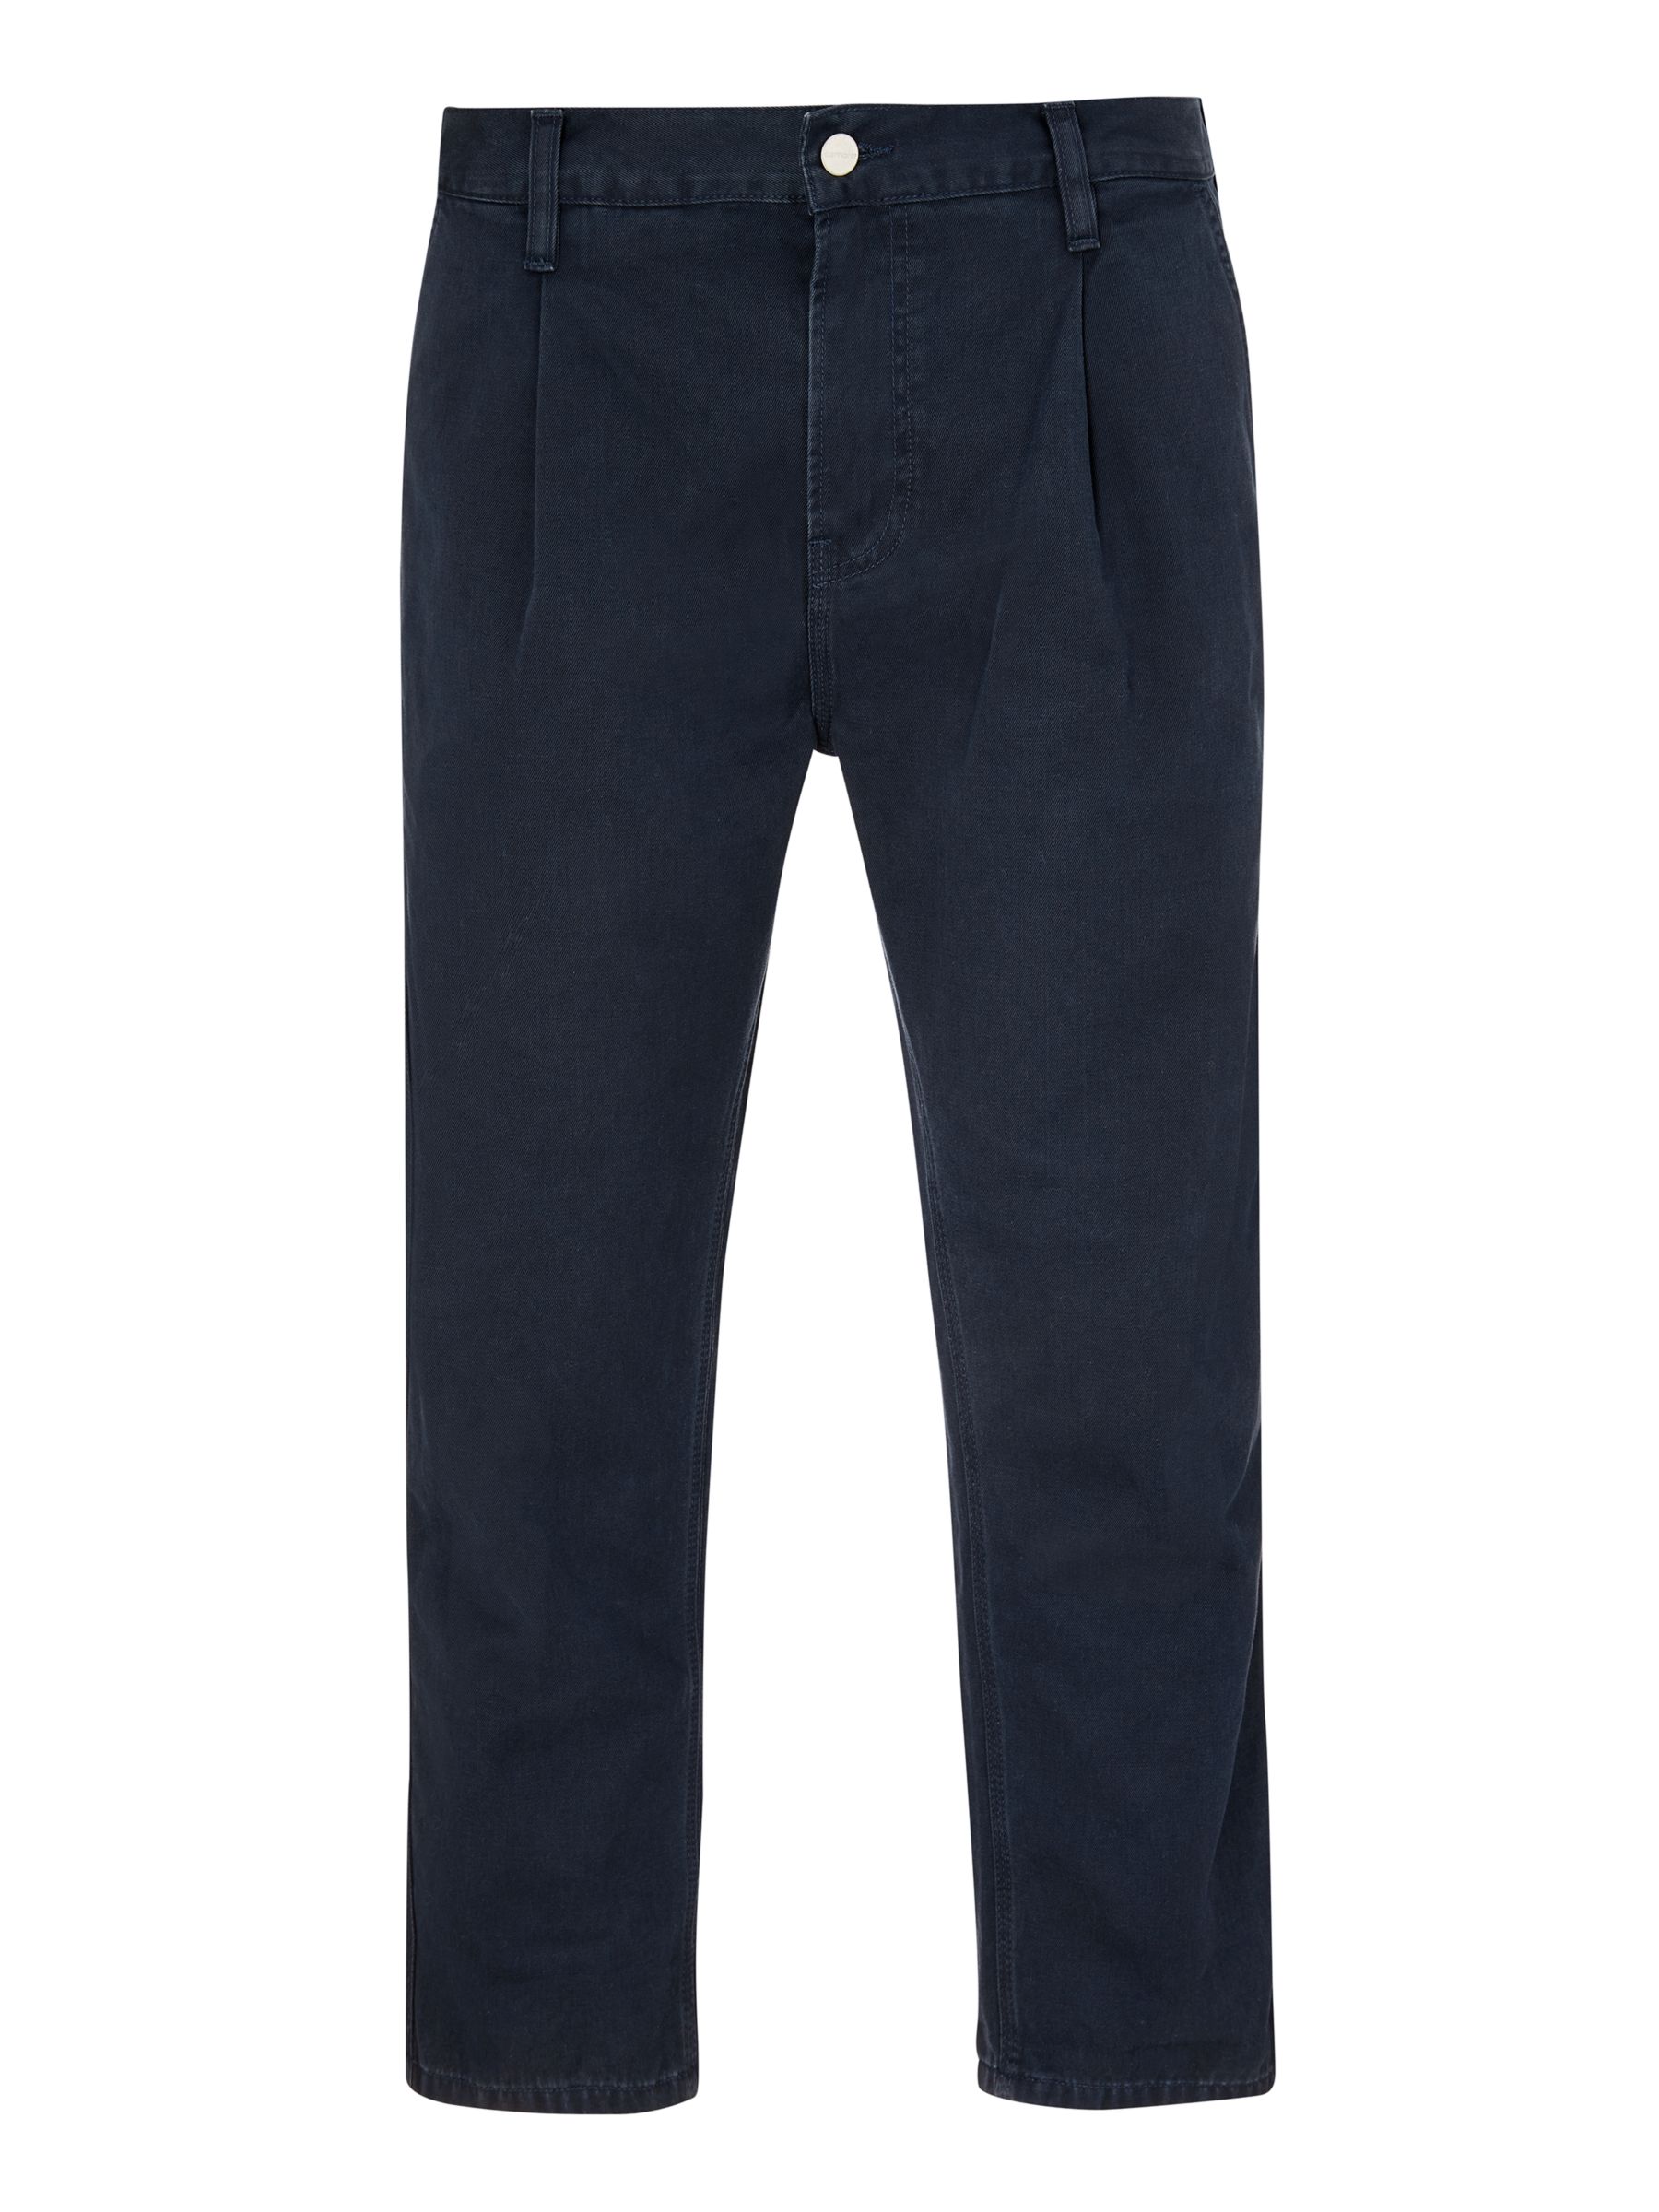 Carhartt WIP Abbot Tapered Trousers, Navy